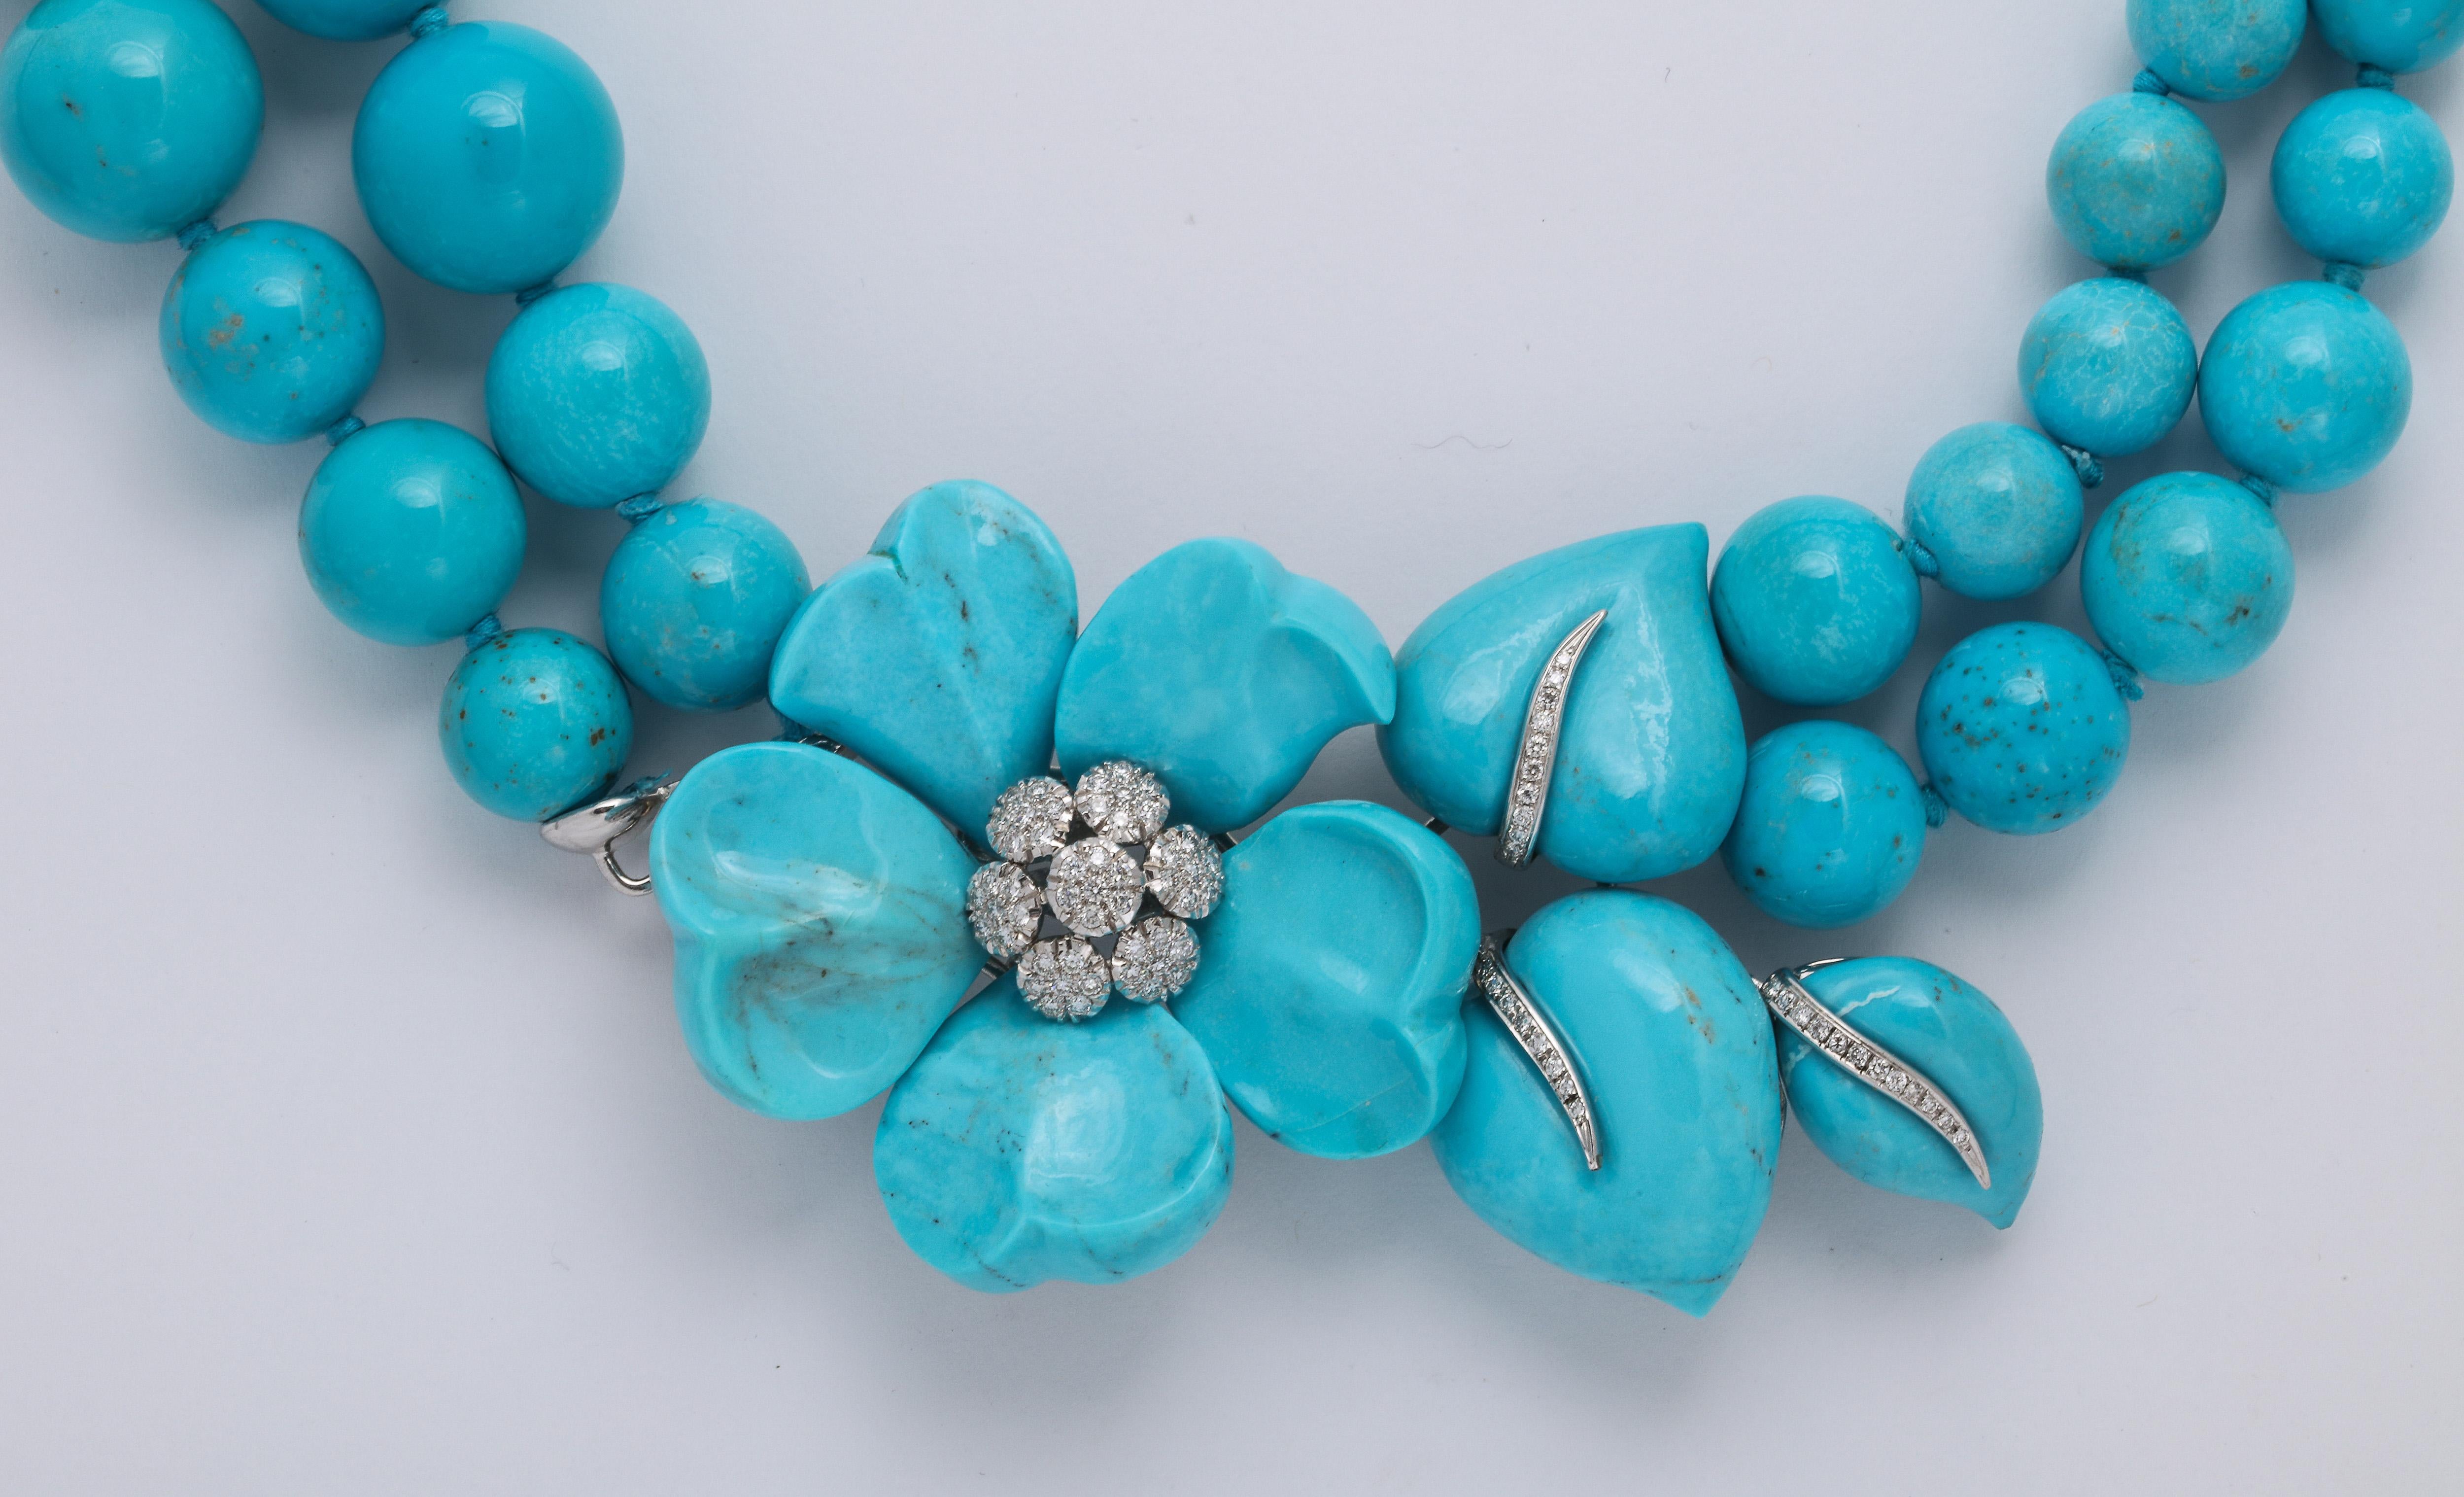 1970's Retro Gorgeous Turquoise Necklace, very unusual Estate piece!
Has an attached carved turquoise flower with diamonds 
Can be doubled or just hang low

320 Grams of Turquoise 
Necklace with White Gold Setting Stamped 750
79 Diamonds approx.